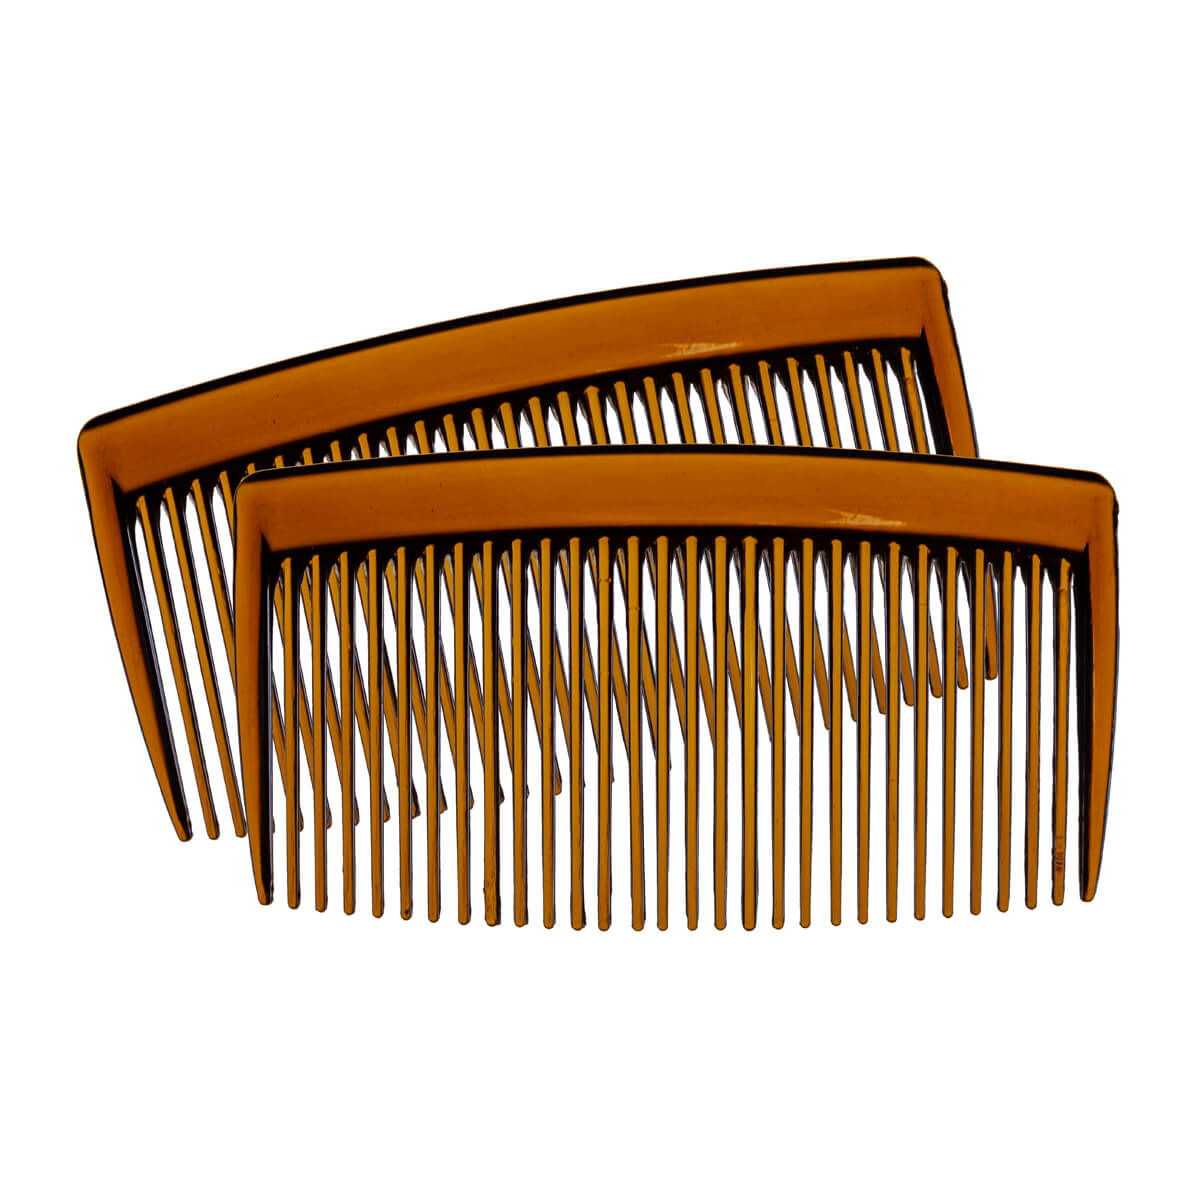 Plastic side comb with straight spikes 2pcs (8cm x 4,8cm)